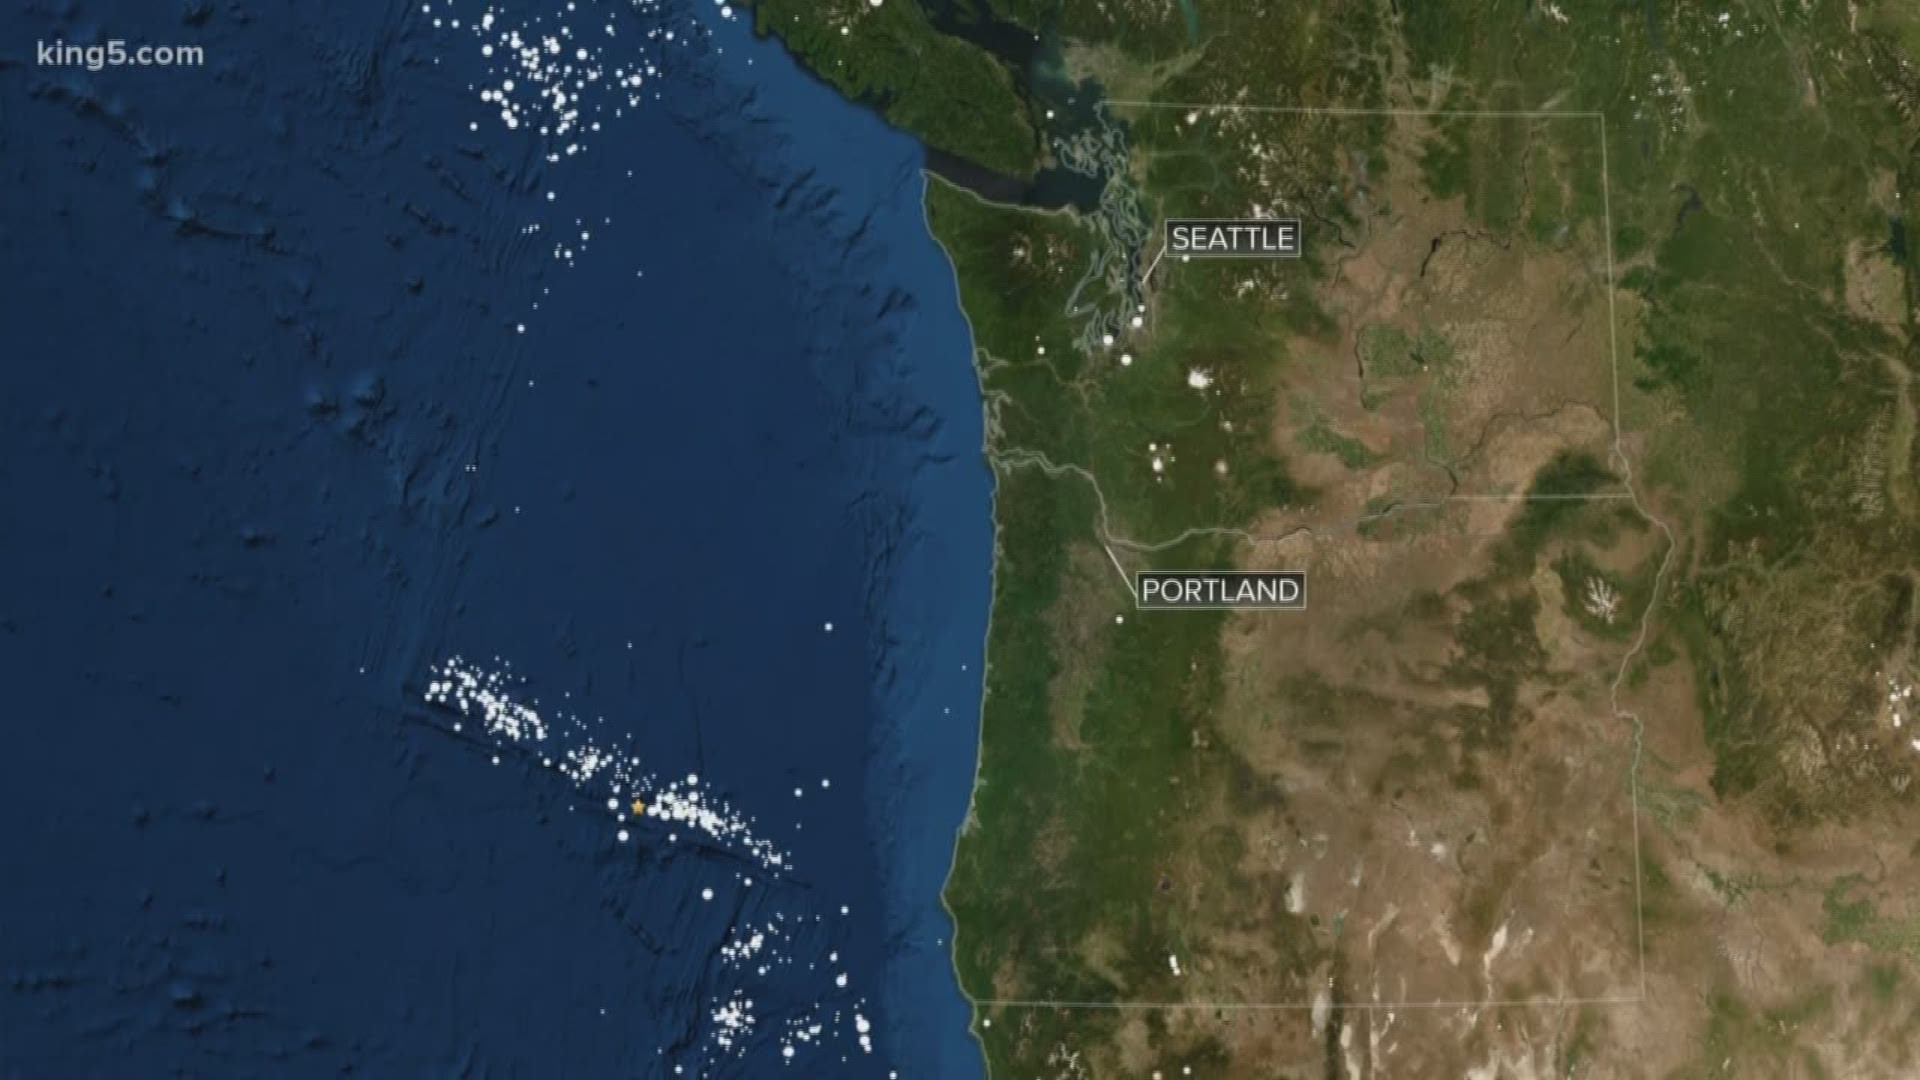 The quake 170 miles off the coast was at a depth of about 7 miles. No tsunami warning has been issued.